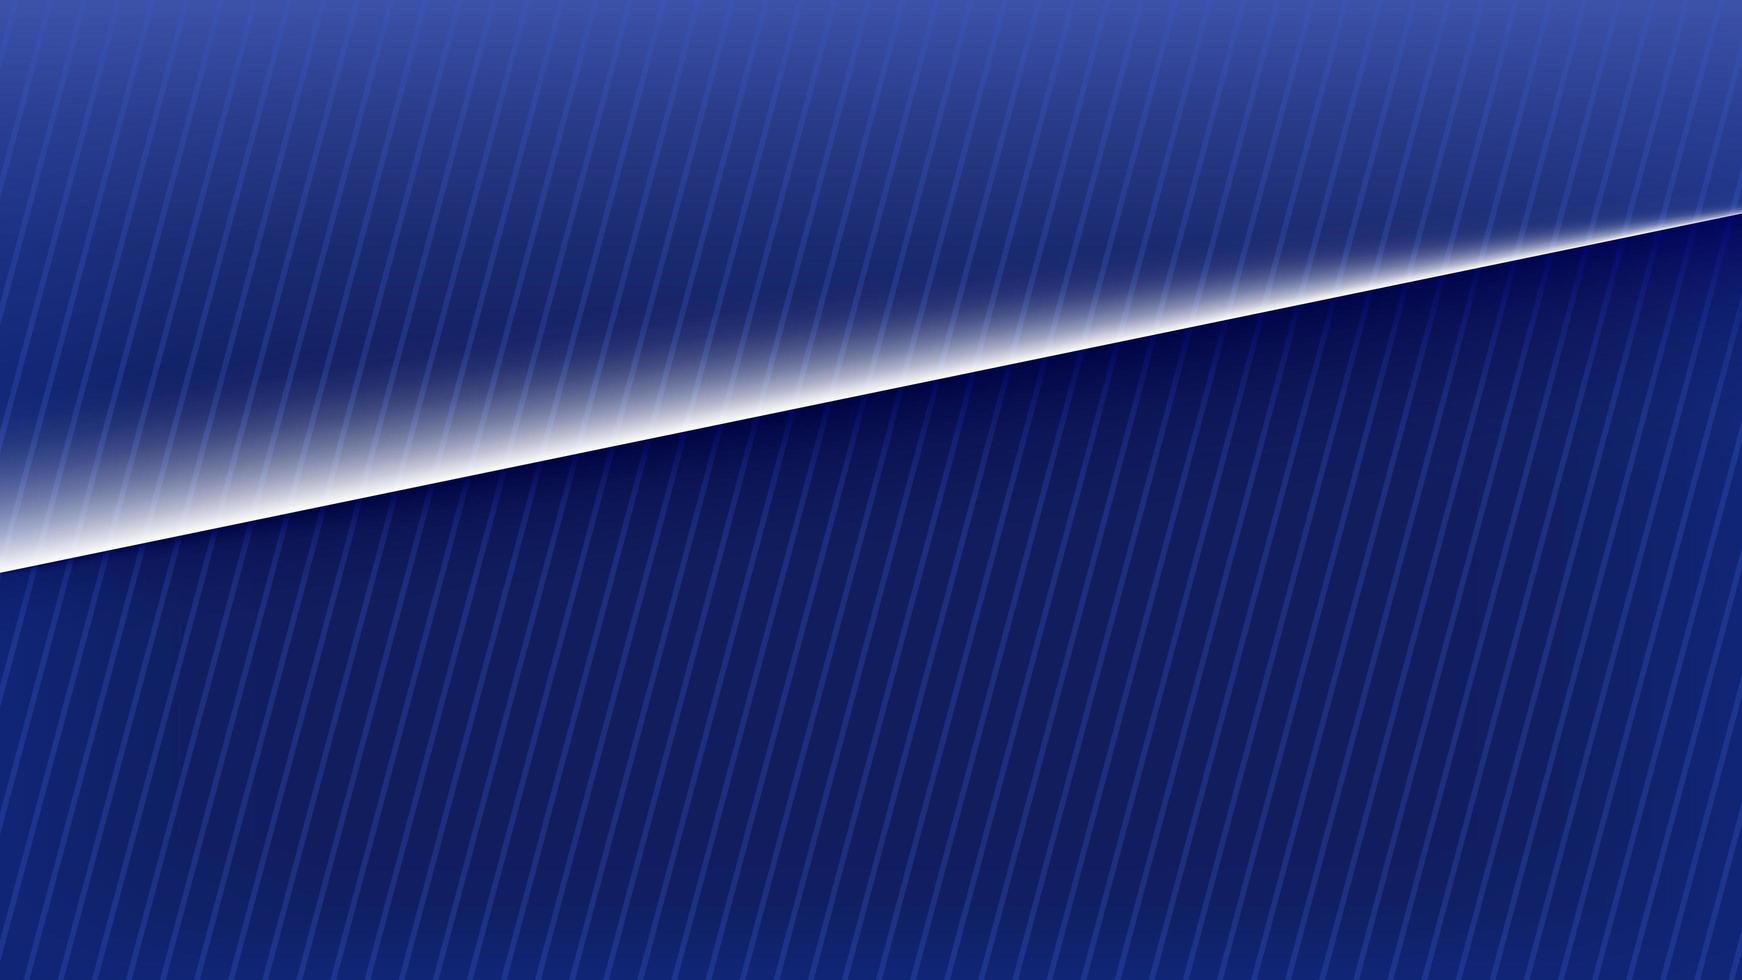 Minimal background dark blue with one white line, suitable for design needs, display, website, UI, and others photo